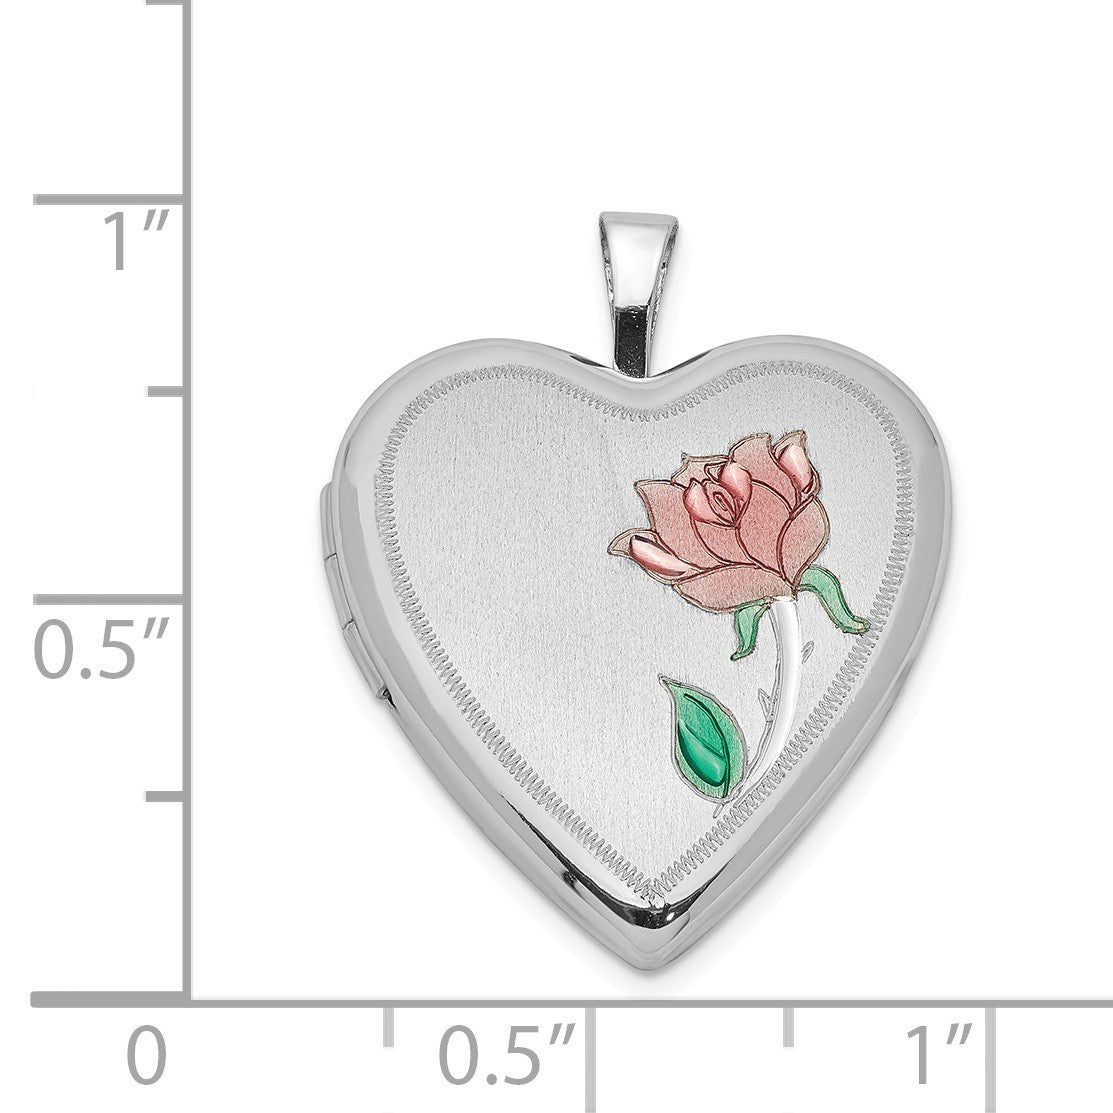 Alternate view of the Sterling Silver and Enamel 20mm Rose Heart Locket by The Black Bow Jewelry Co.